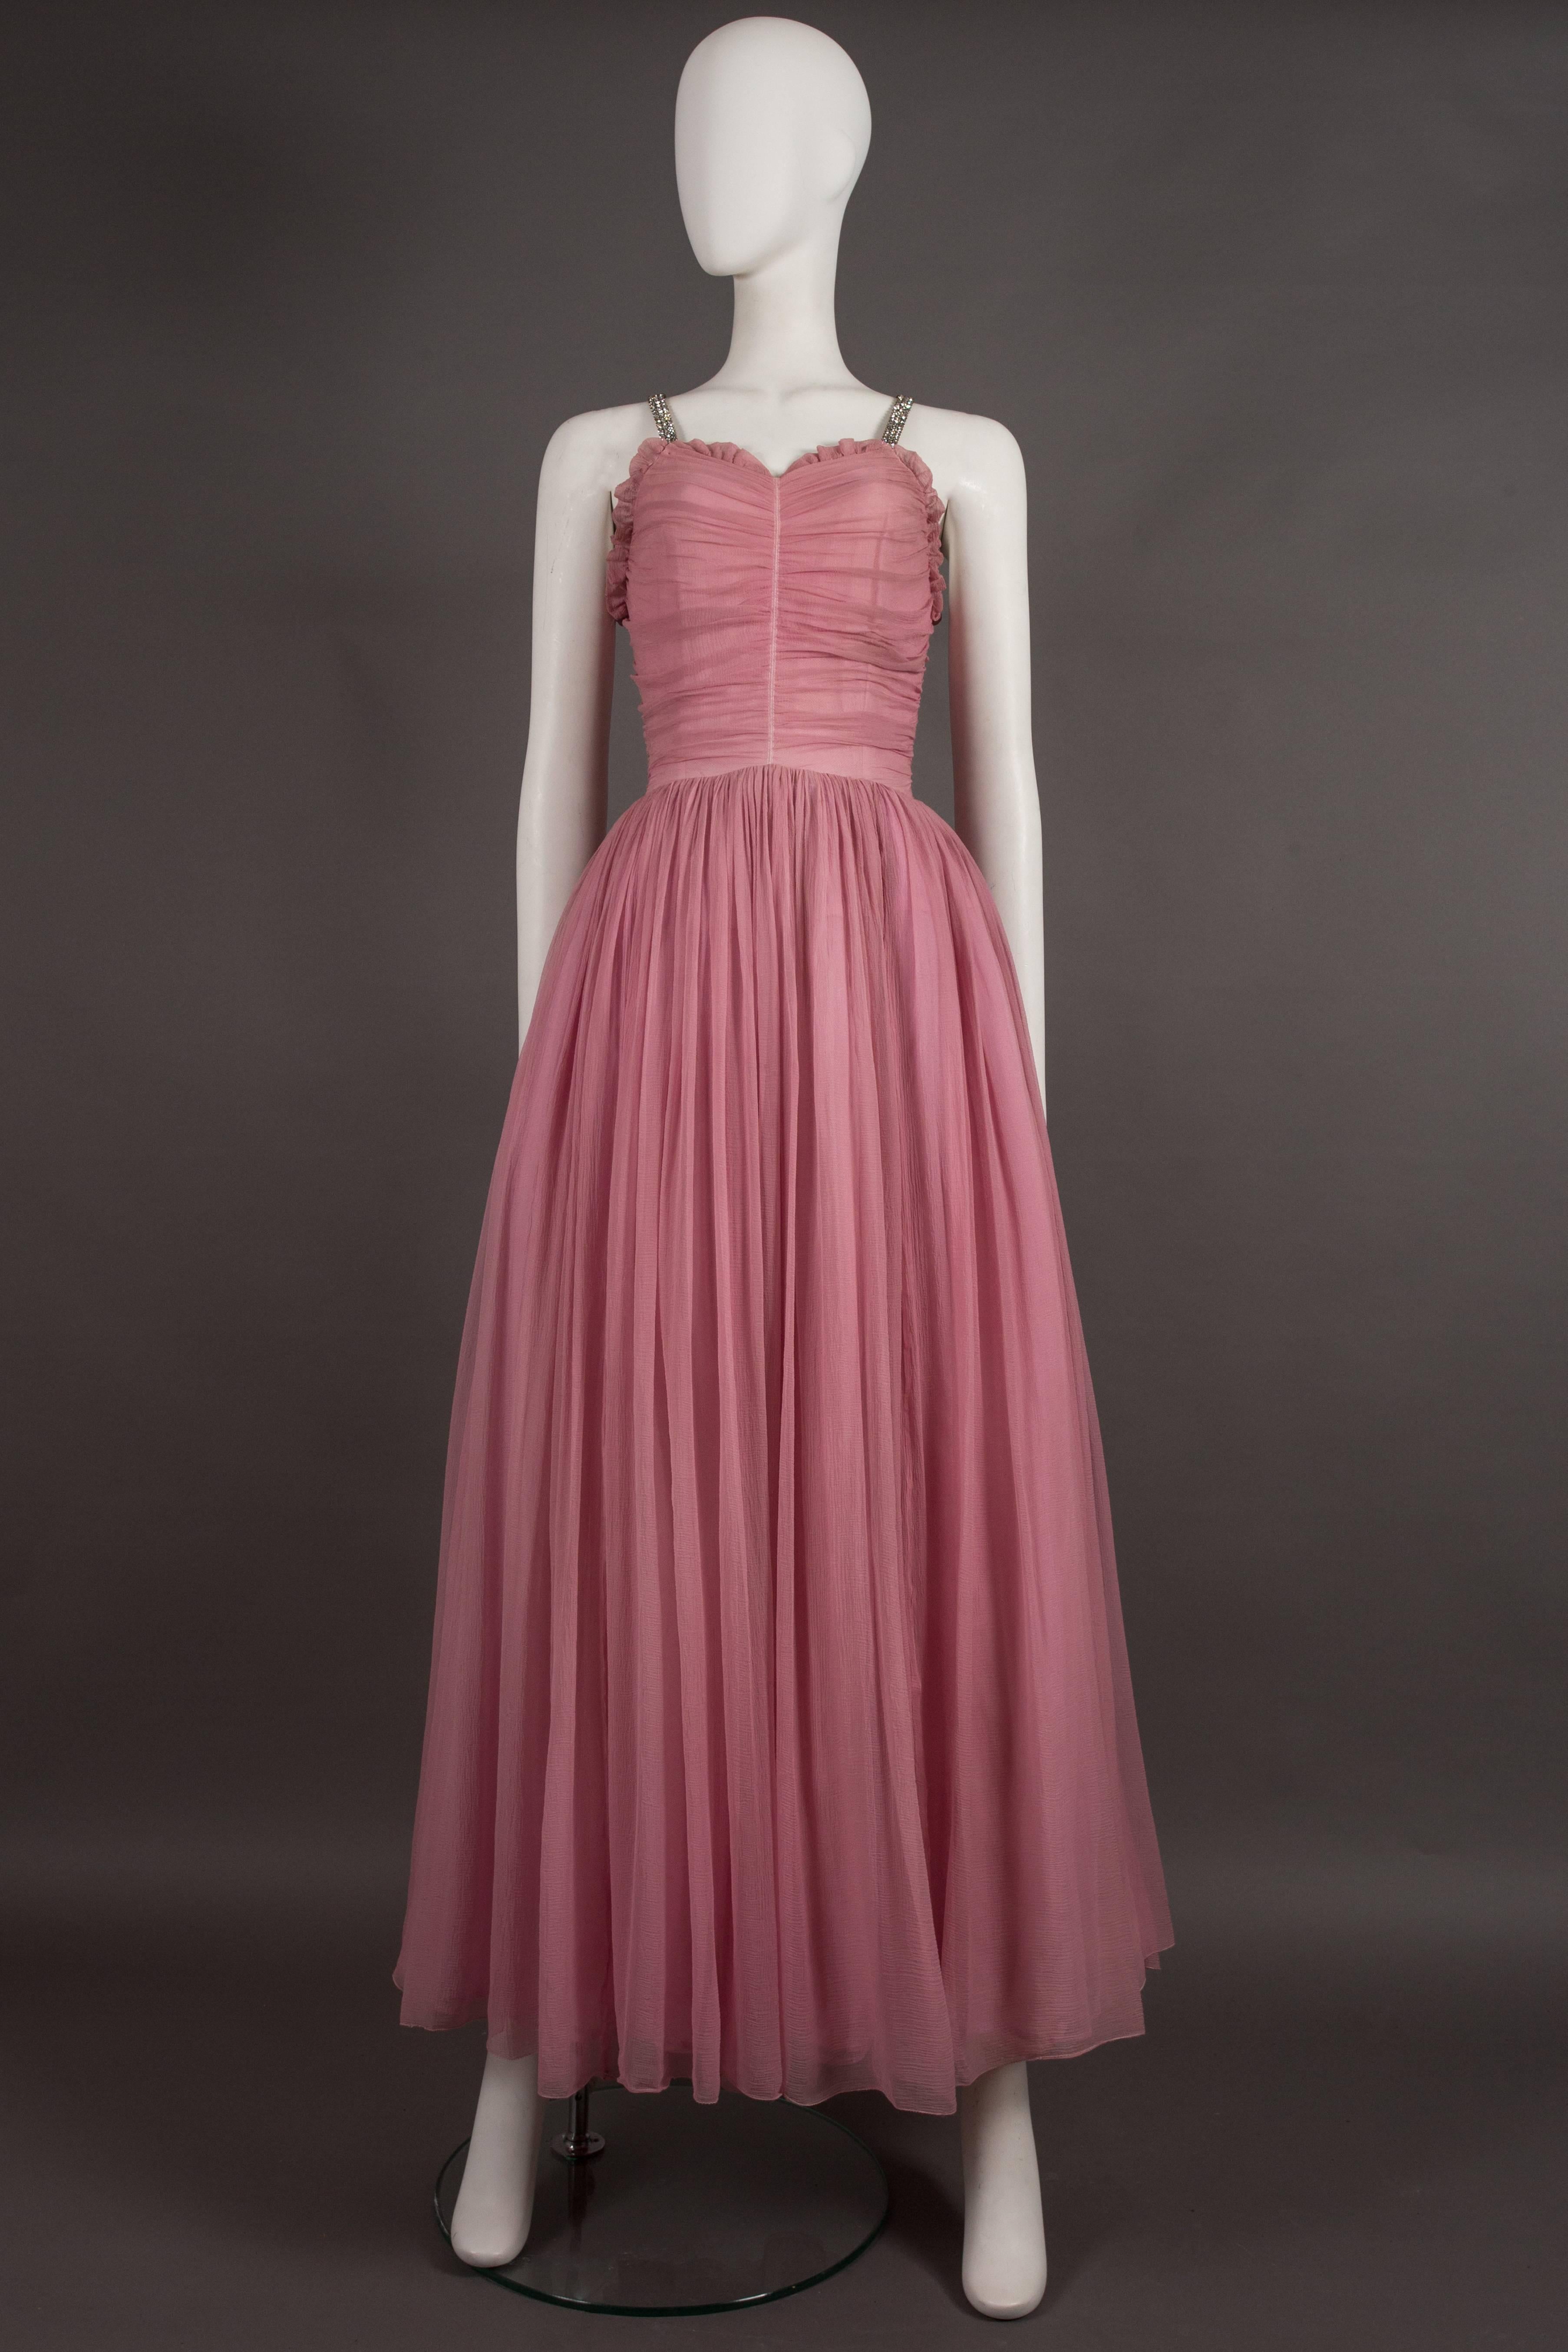 An exceptional couture 1940s evening gown in baby pink silk chiffon. The dress features rhinestone should straps, ruffled trim, ruched bust with original metal zipper and full pleated skirt with three interior layers of tulle, voile and silk